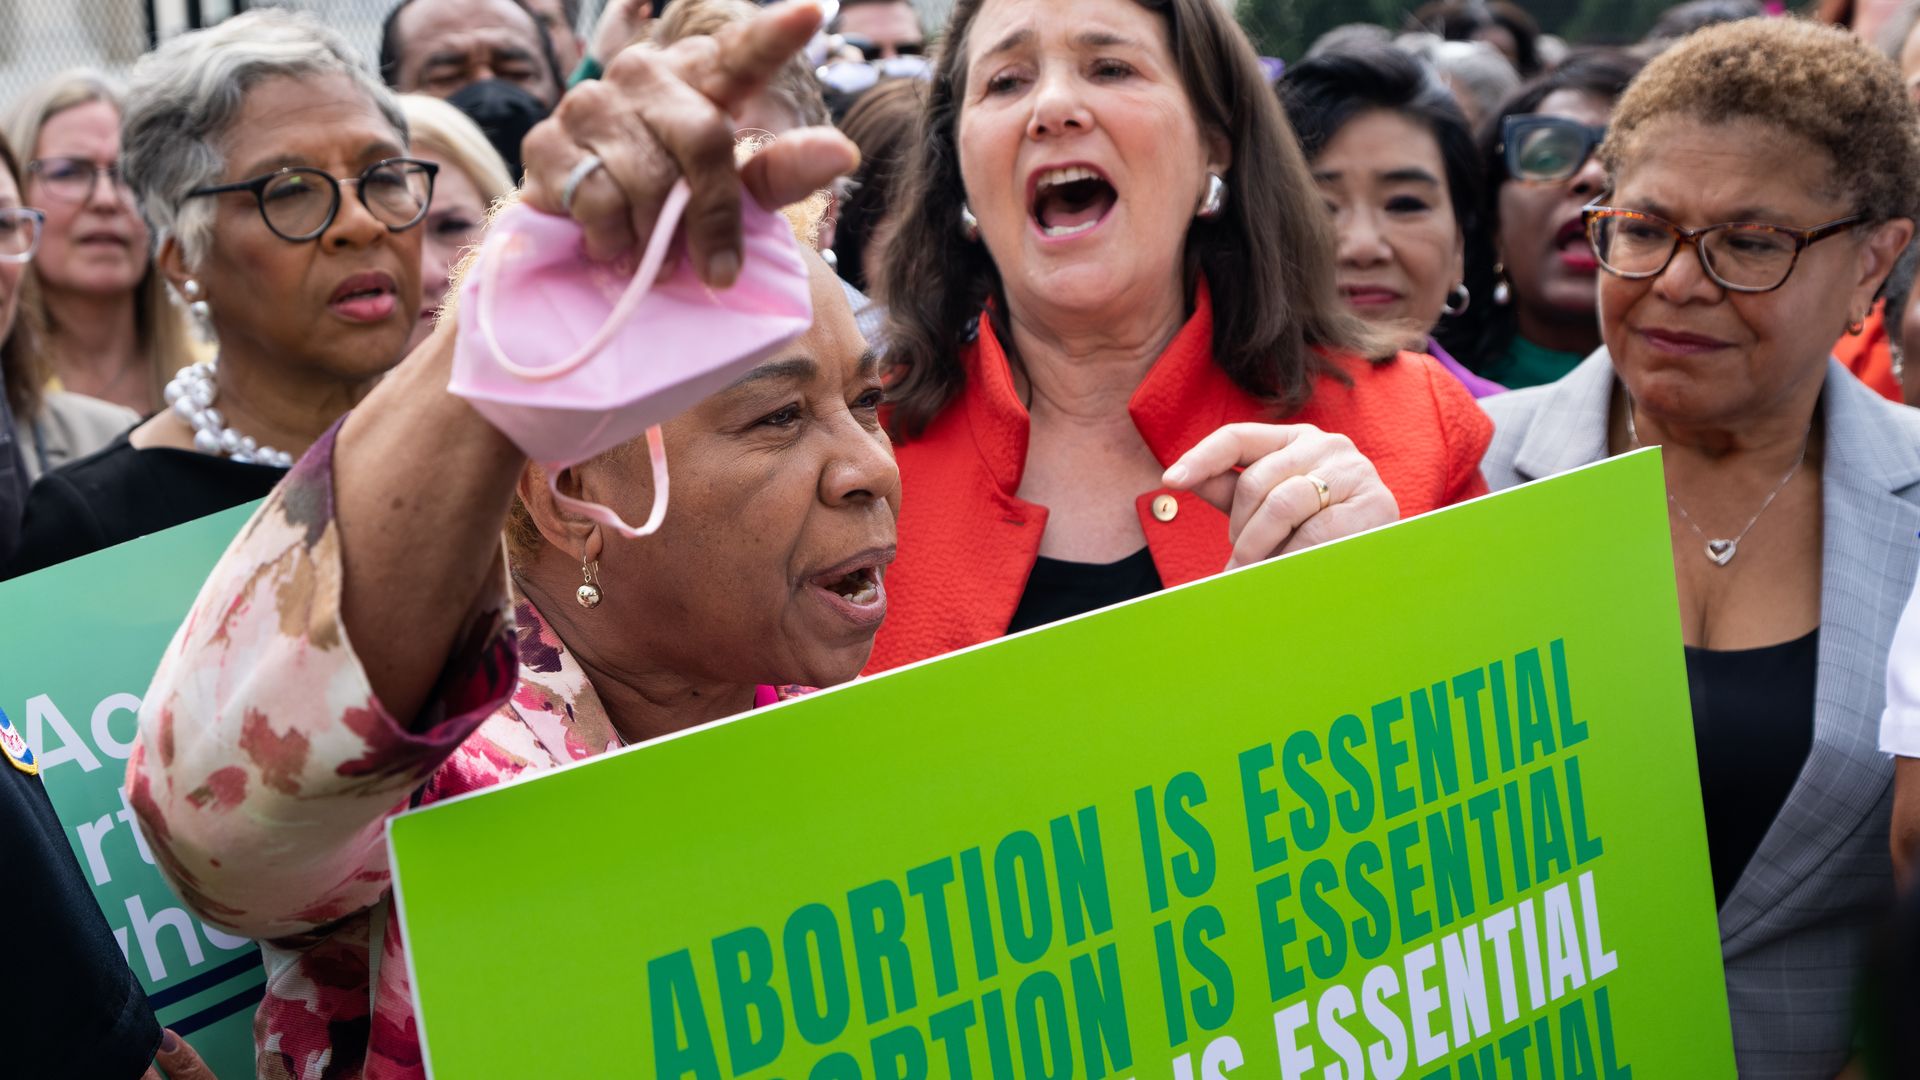 Photo of women lawmakers holding signs that say "Abortion is essential" at a protest